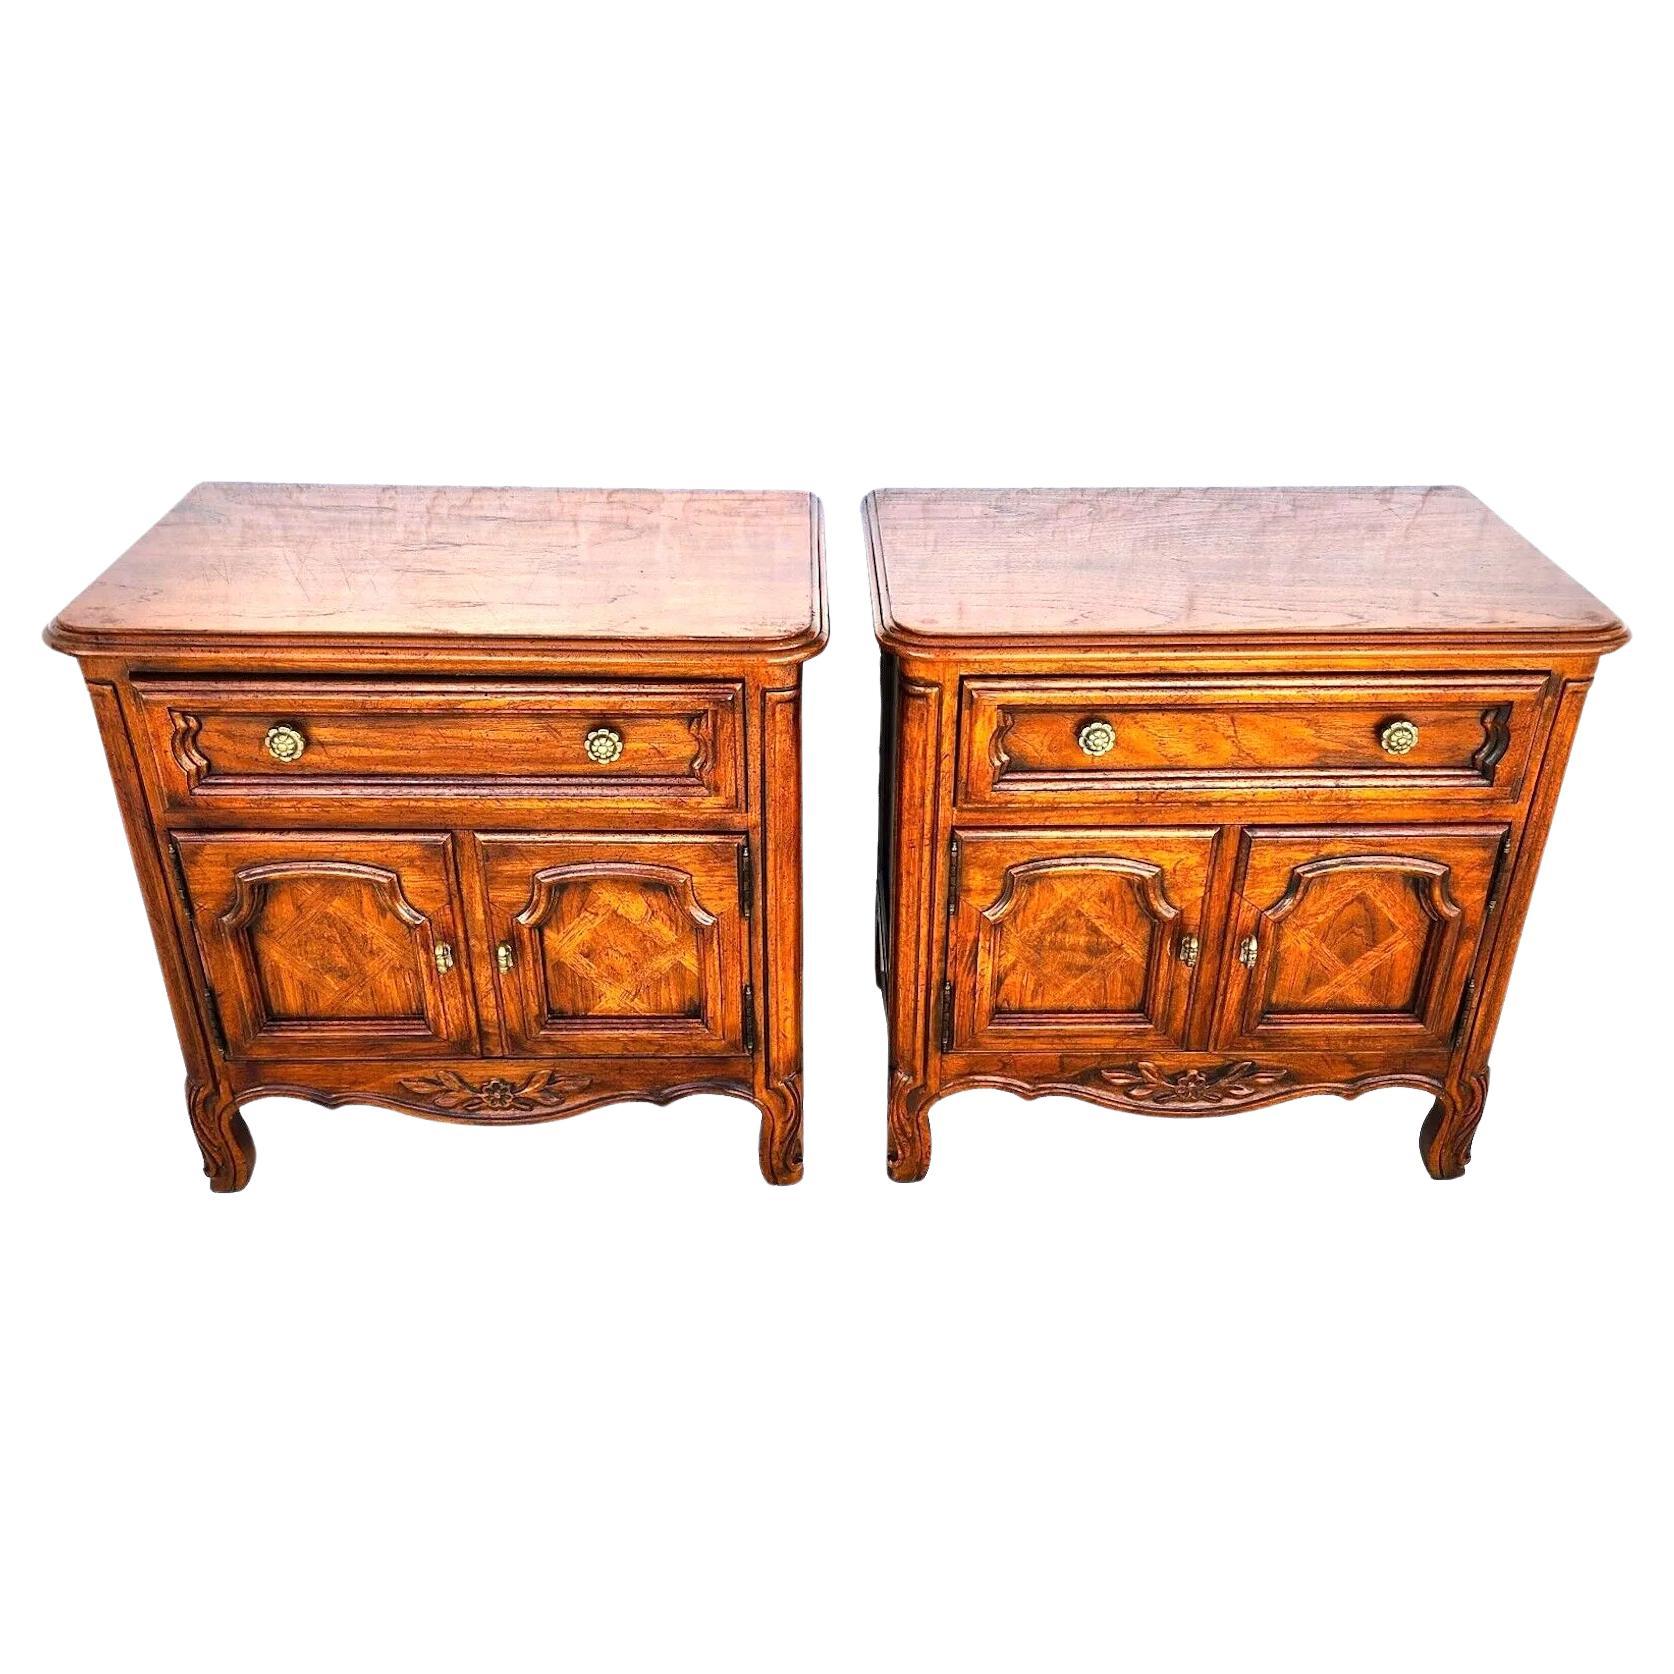 French Provincial Cabernet Nightstands by Drexel Pair For Sale